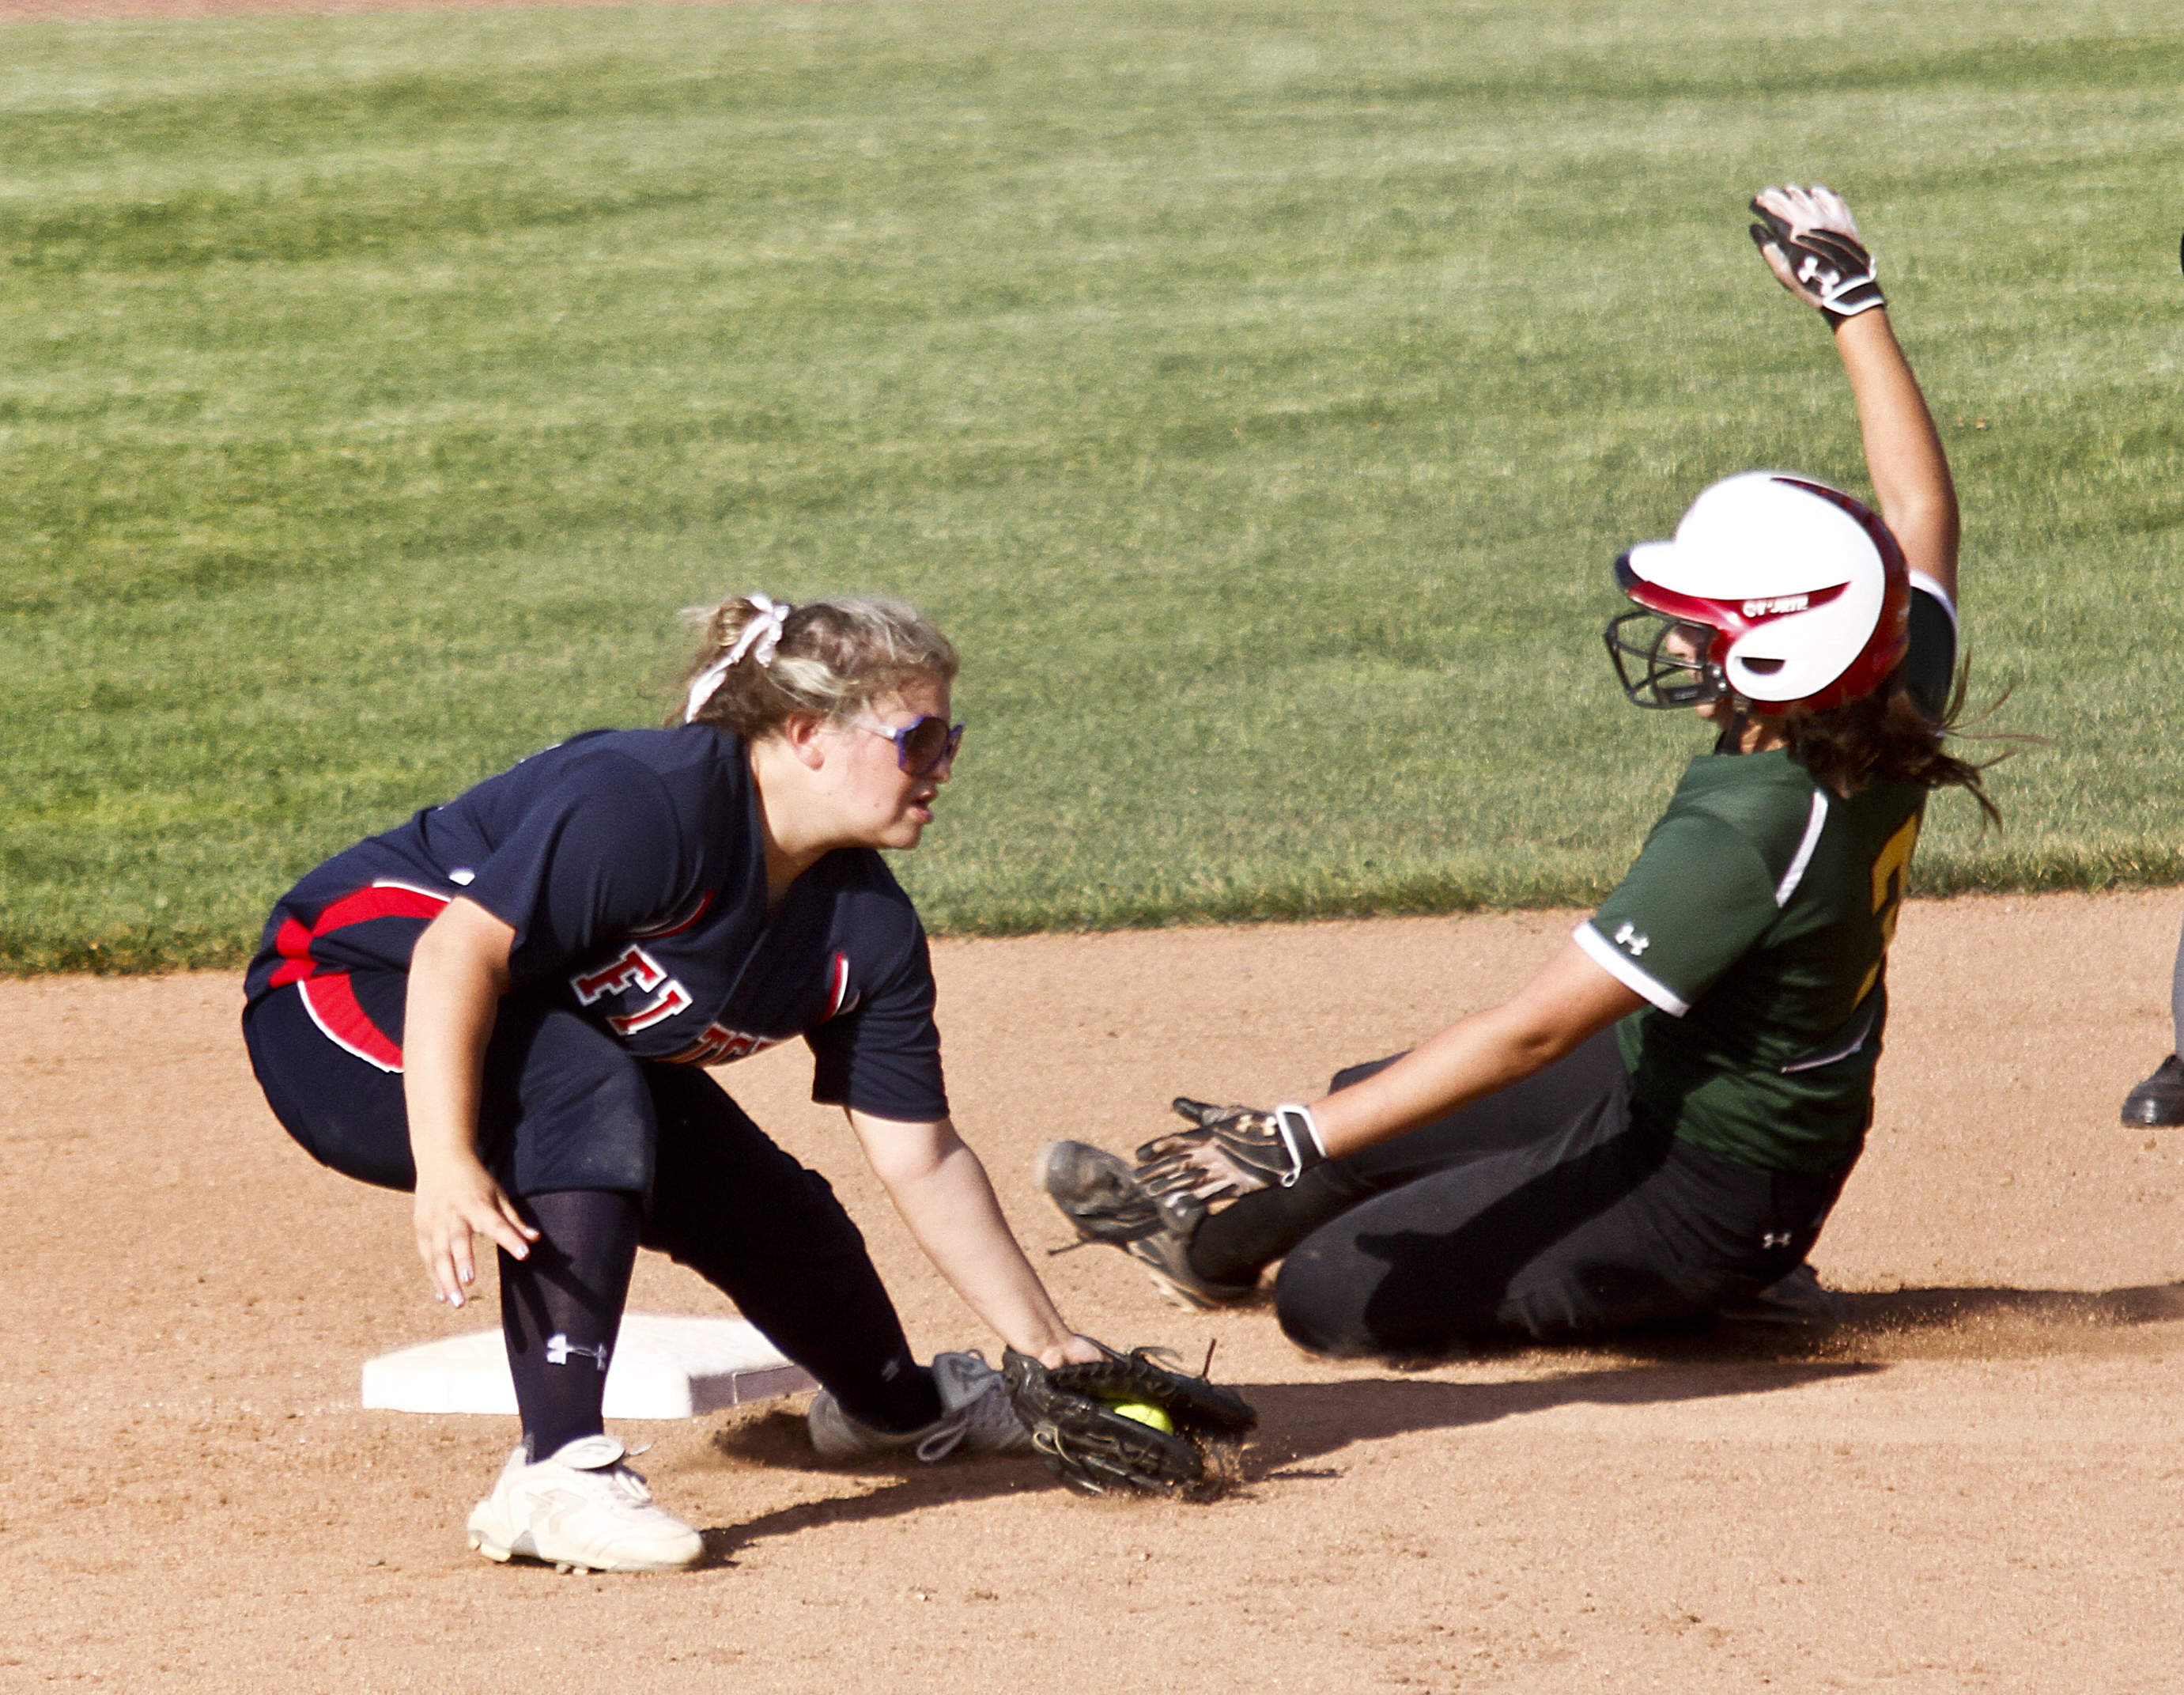 MADELYN P. HASTINGS I THE VINDICATOR

Fitch's Alessandra Corradi (13) fails to tag Medina's Lauren Peak (3) as she slides into third base during their game at the University of Akron on May 30, 2013. Fitch lost to Medina 5-3.